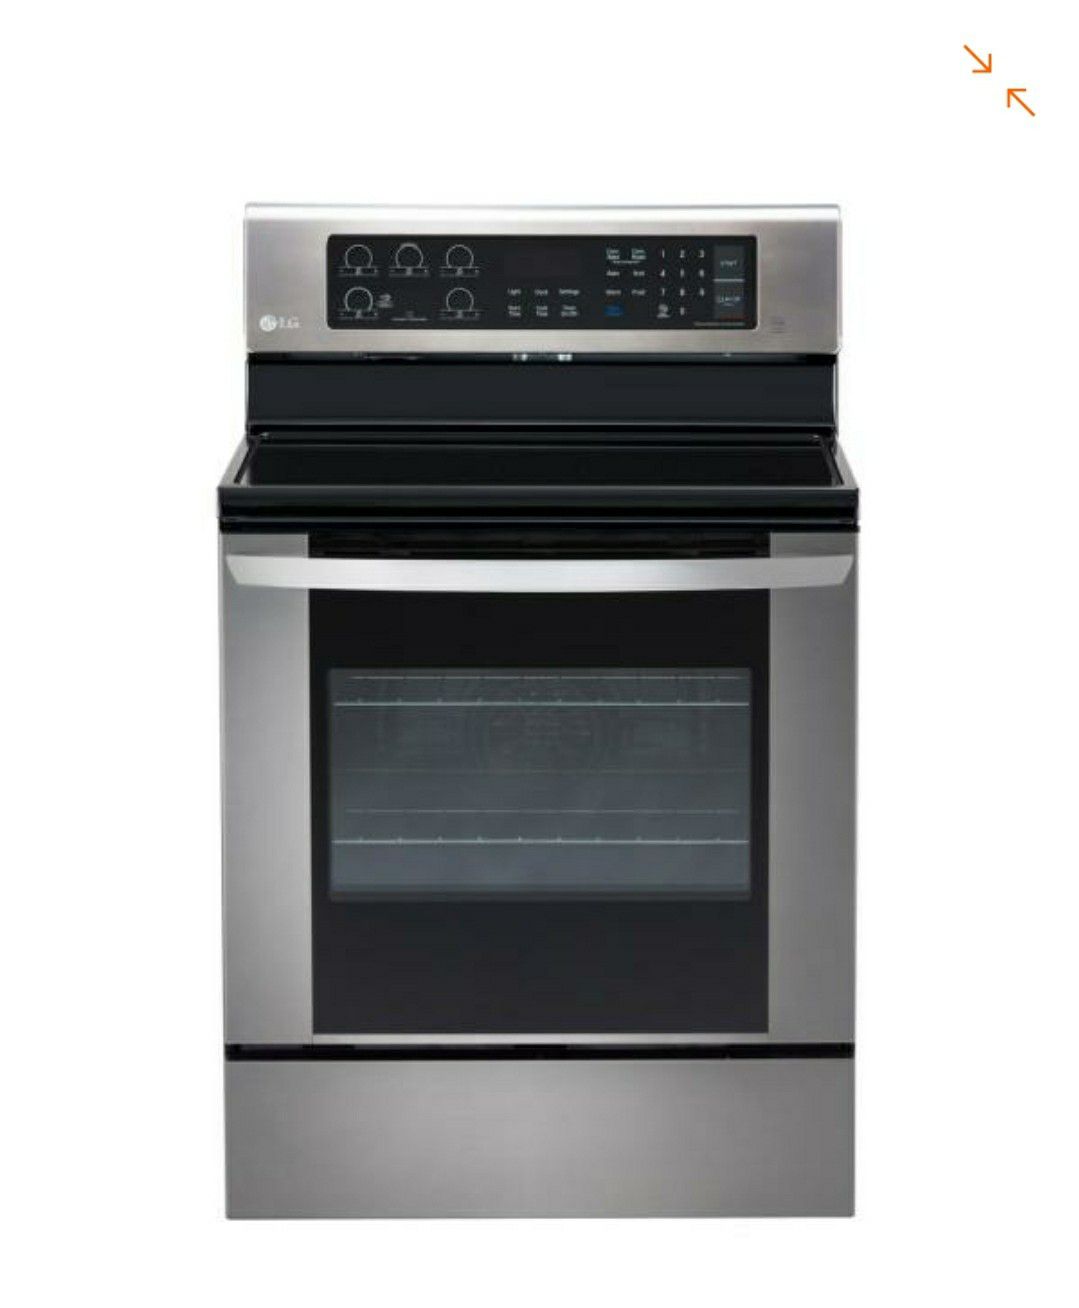 LG Electronics 6.3 cu. ft. Electric Range with EasyClean Convection Oven in Stainless Steel